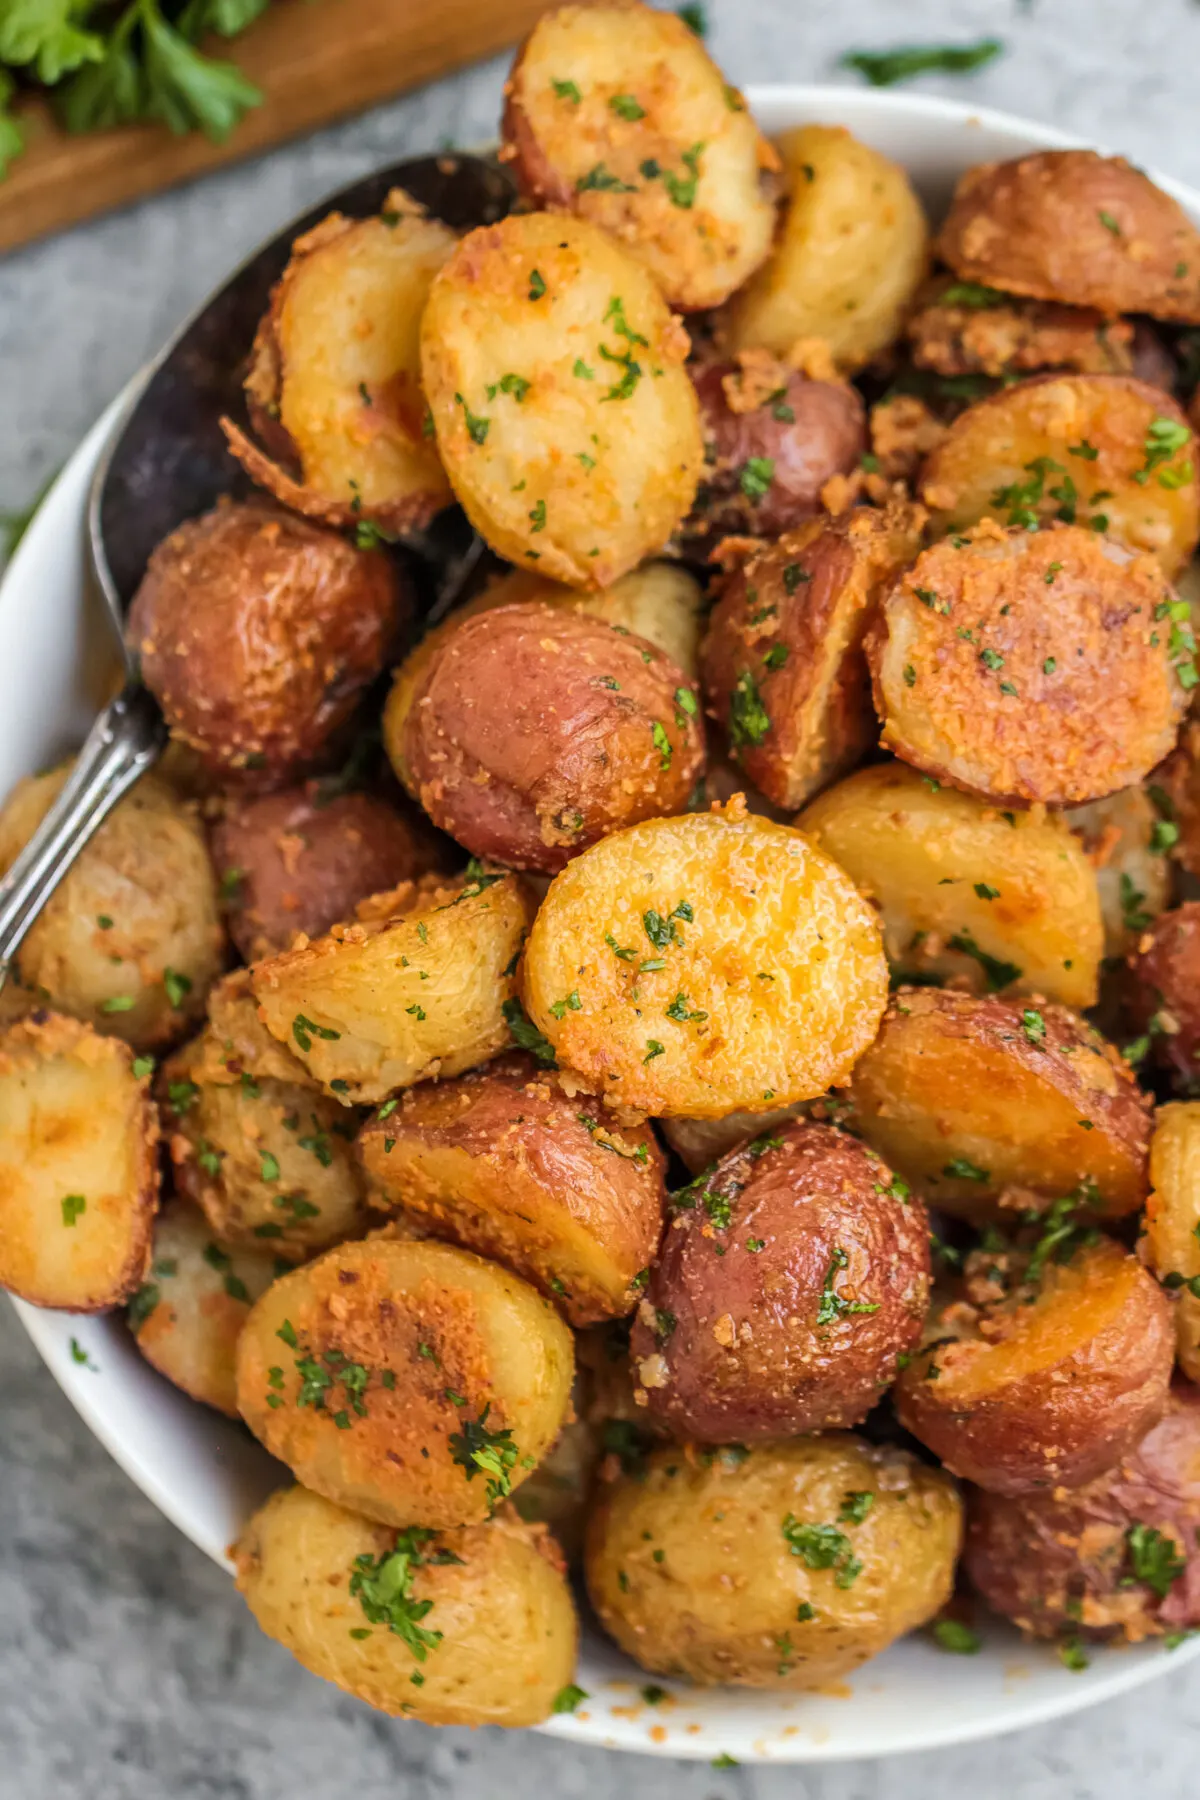 This recipe for crispy roasted garlic parmesan baby potatoes is an easy side dish that's great with any meal.